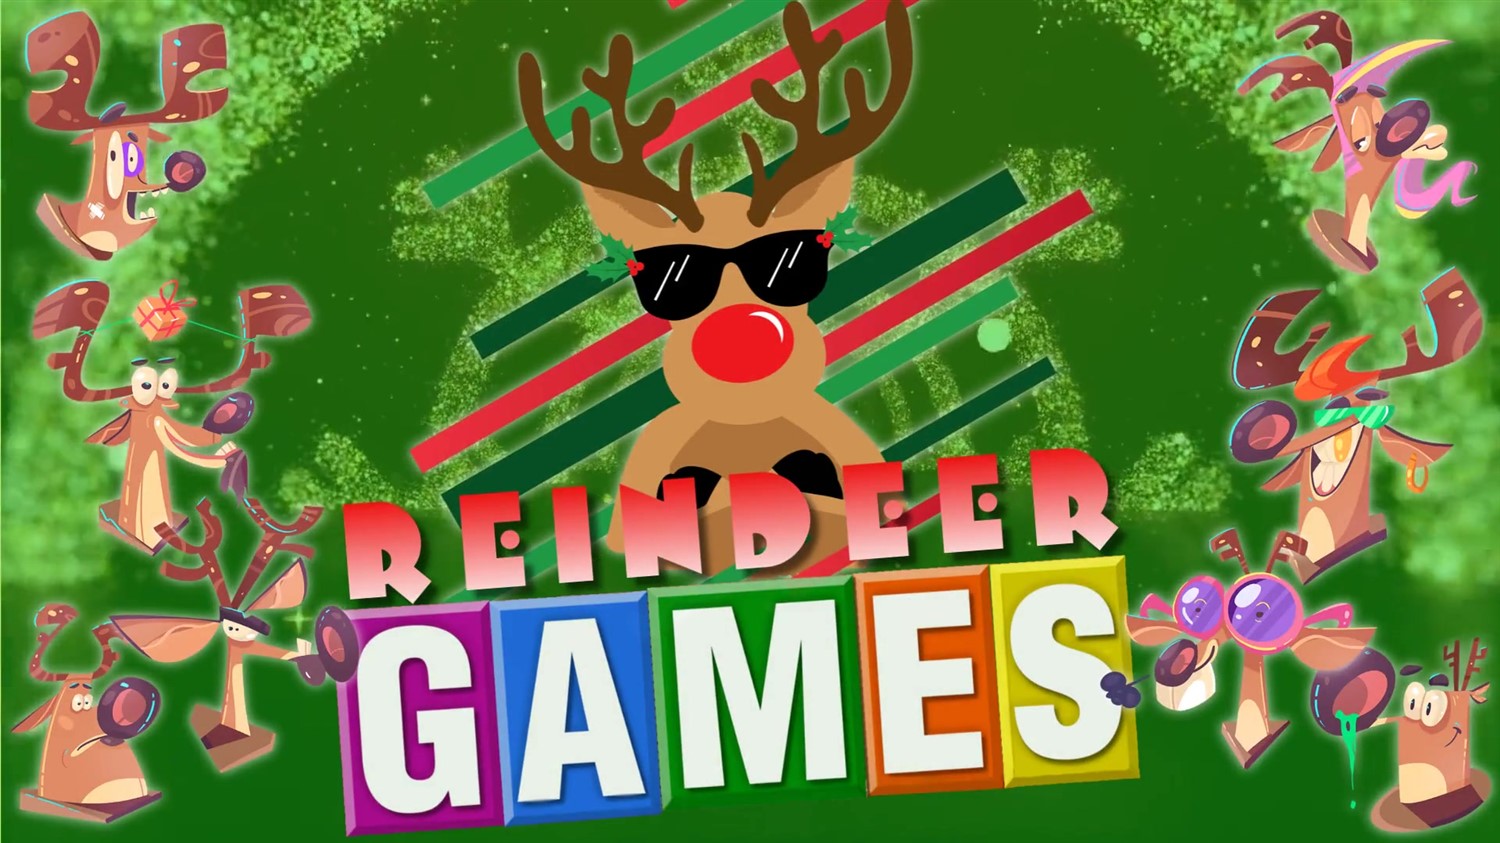 REINDEER GAMES Fun Holiday Game Show for All Ages on Dec 02, 19:00@FFX Theatre - Pick a seat, Buy tickets and Get information on Family Fun Xperience tickets.ffxshow.org